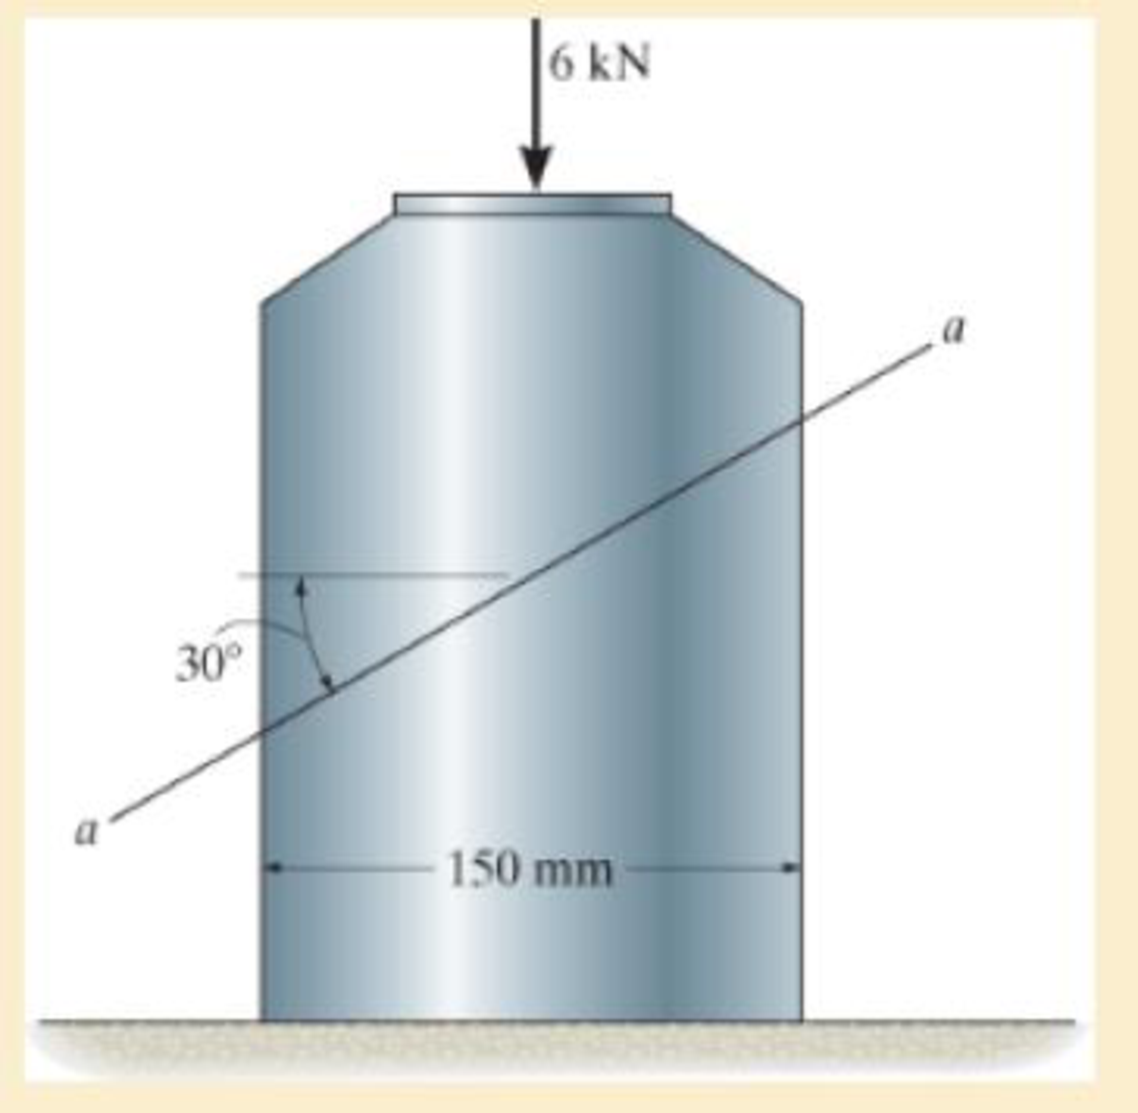 Chapter 1, Problem 1.6RP, The 150 mm by 150 mm block of aluminum supports a compressive load of 6 kN. Determine the average 